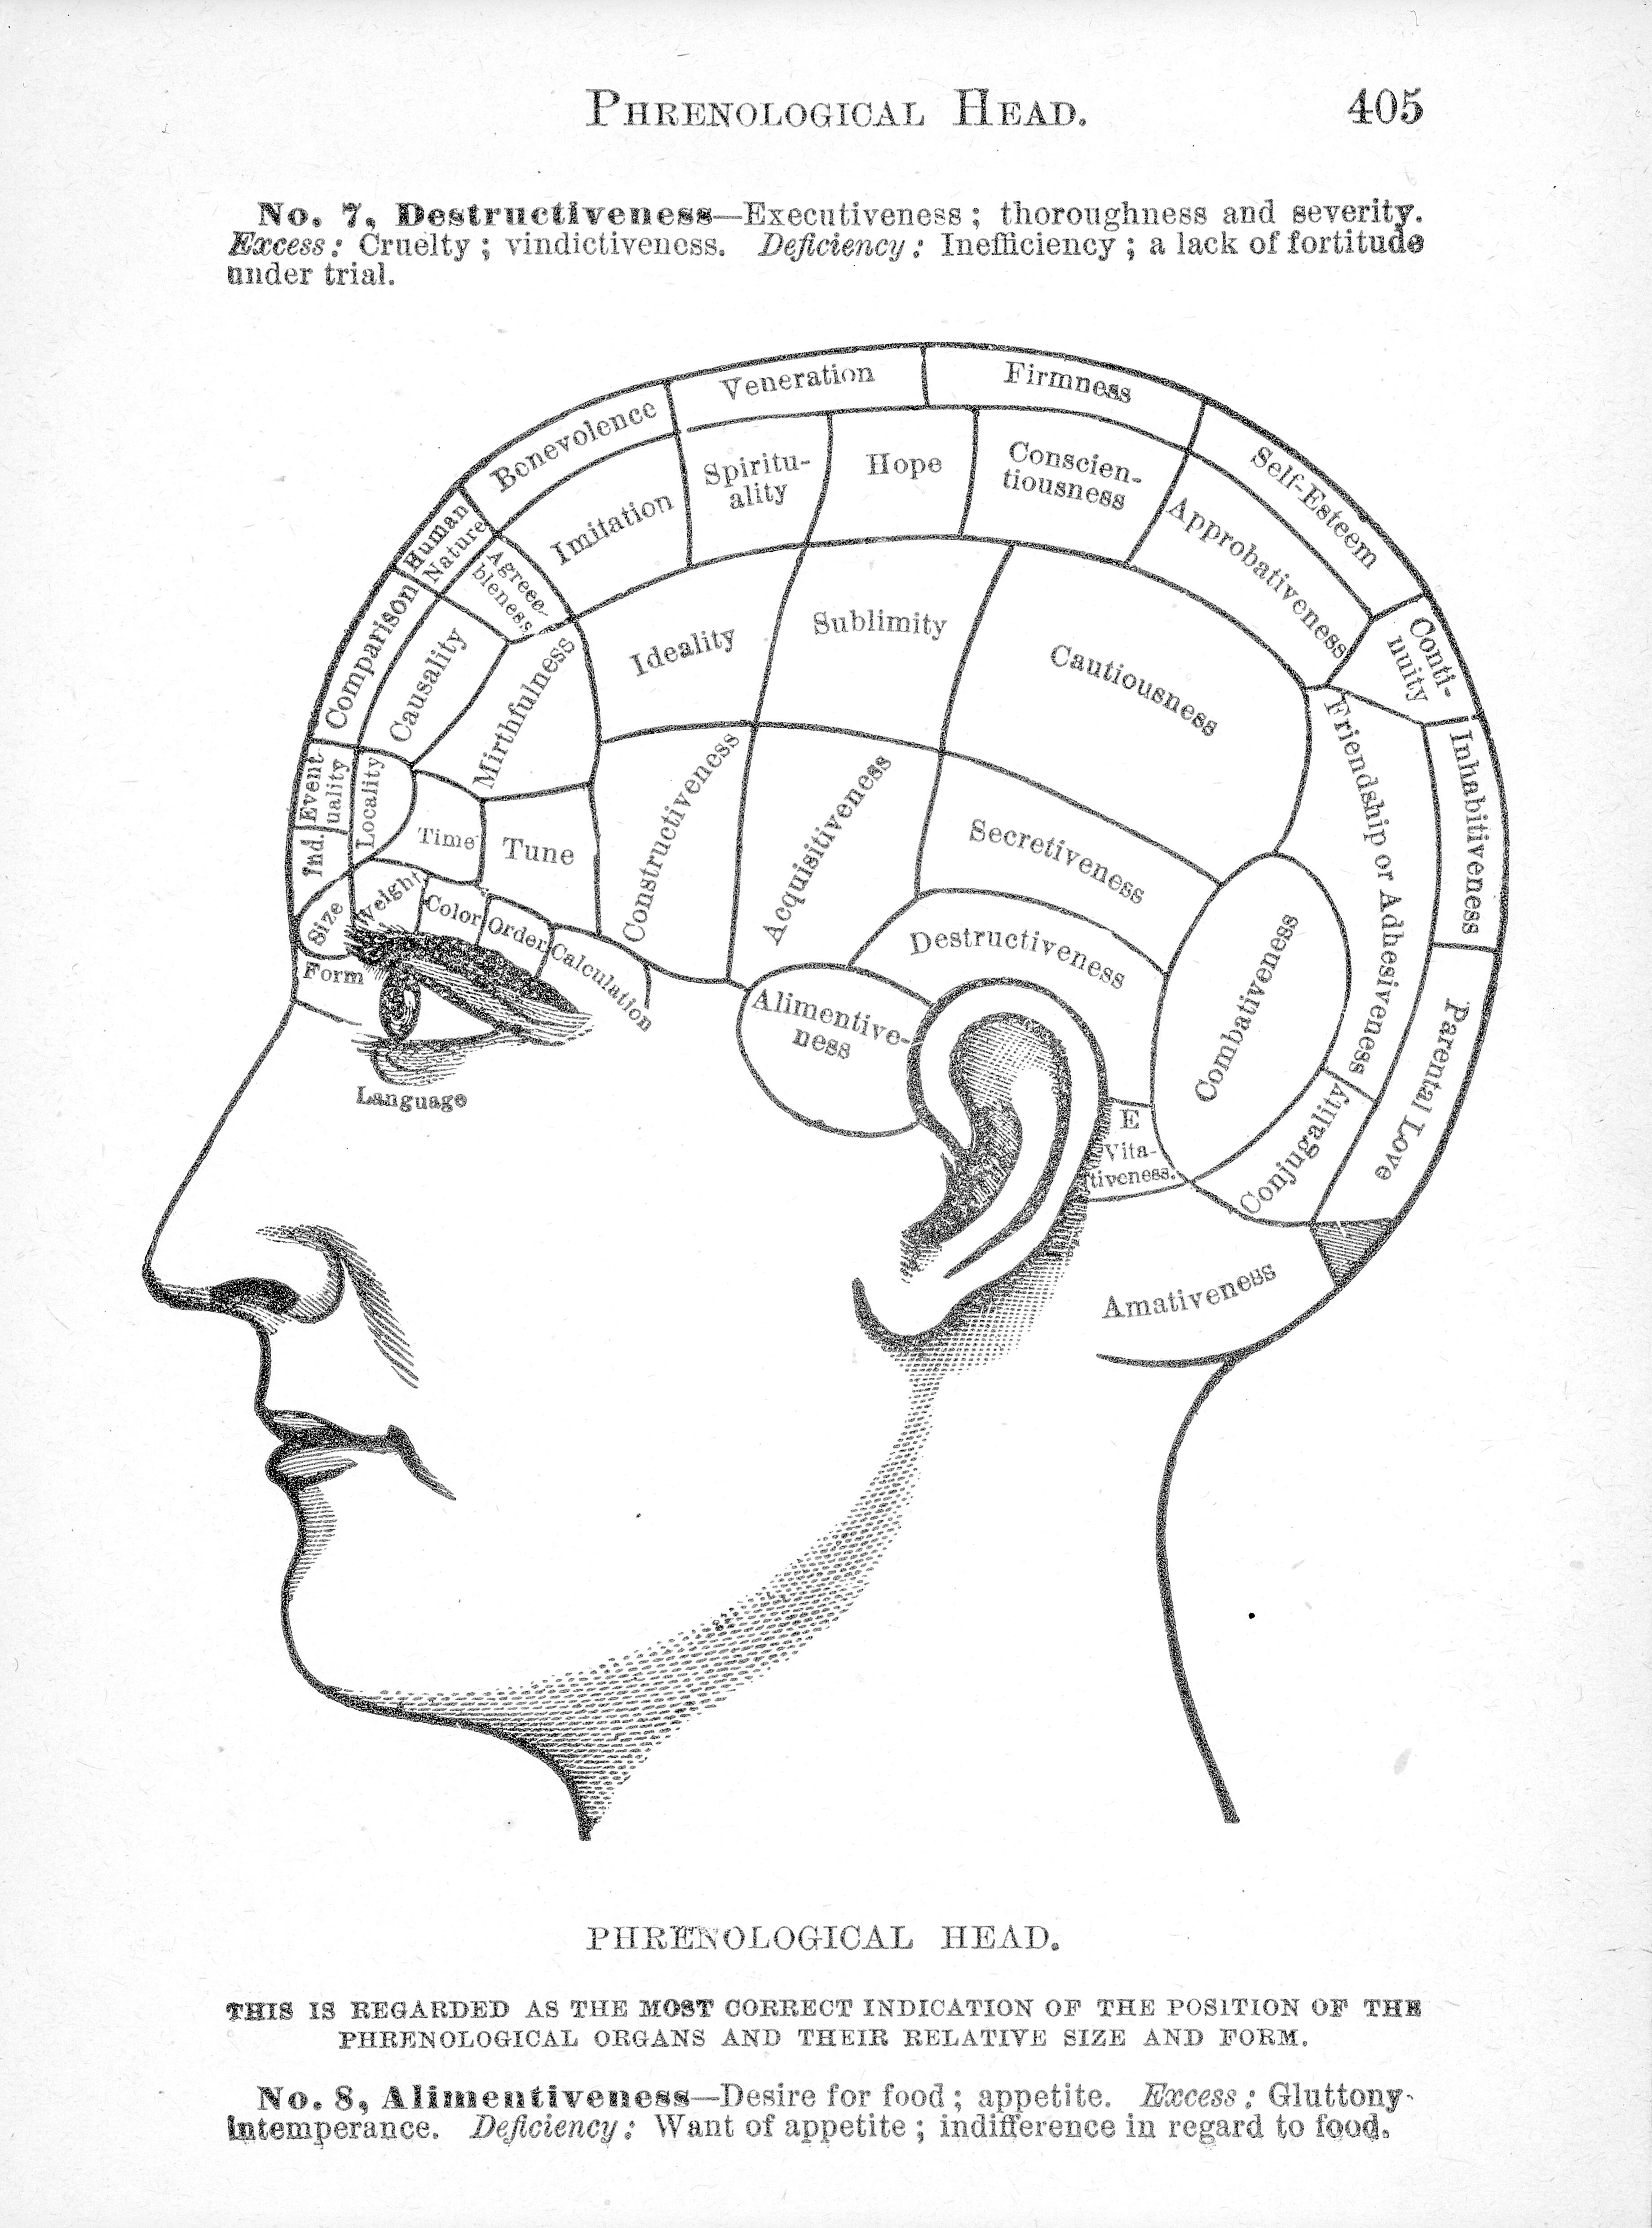 Phrenological diagram taken from Nelson Sizer's book.